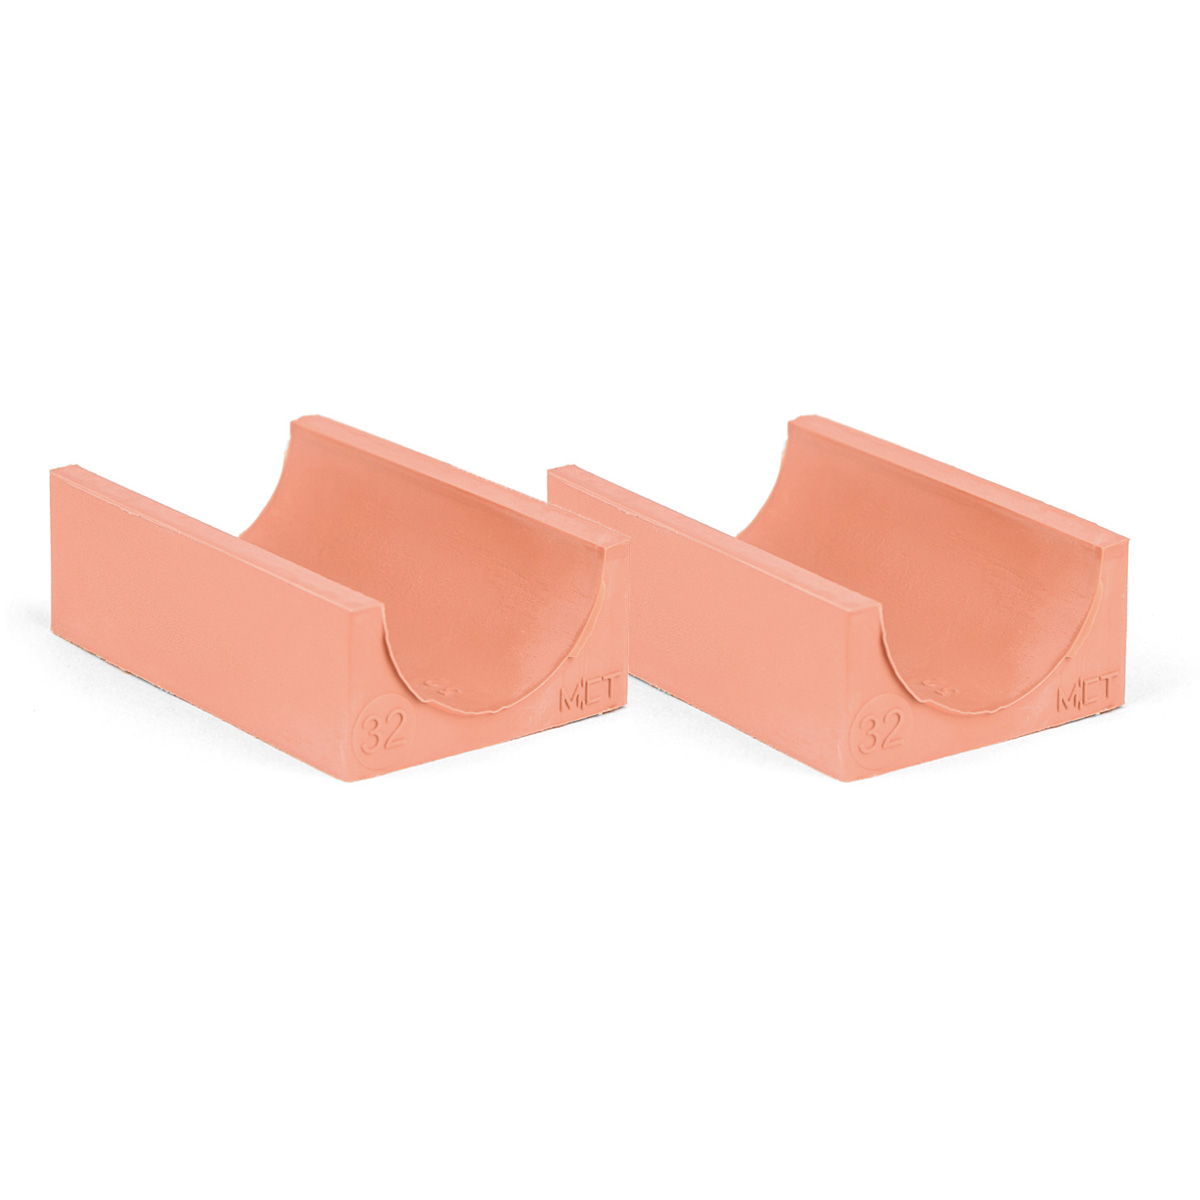 40-32*2 Set of 2 half insert block lycron, 40-32 for cable/pipe diam. 31.5-33.5mm